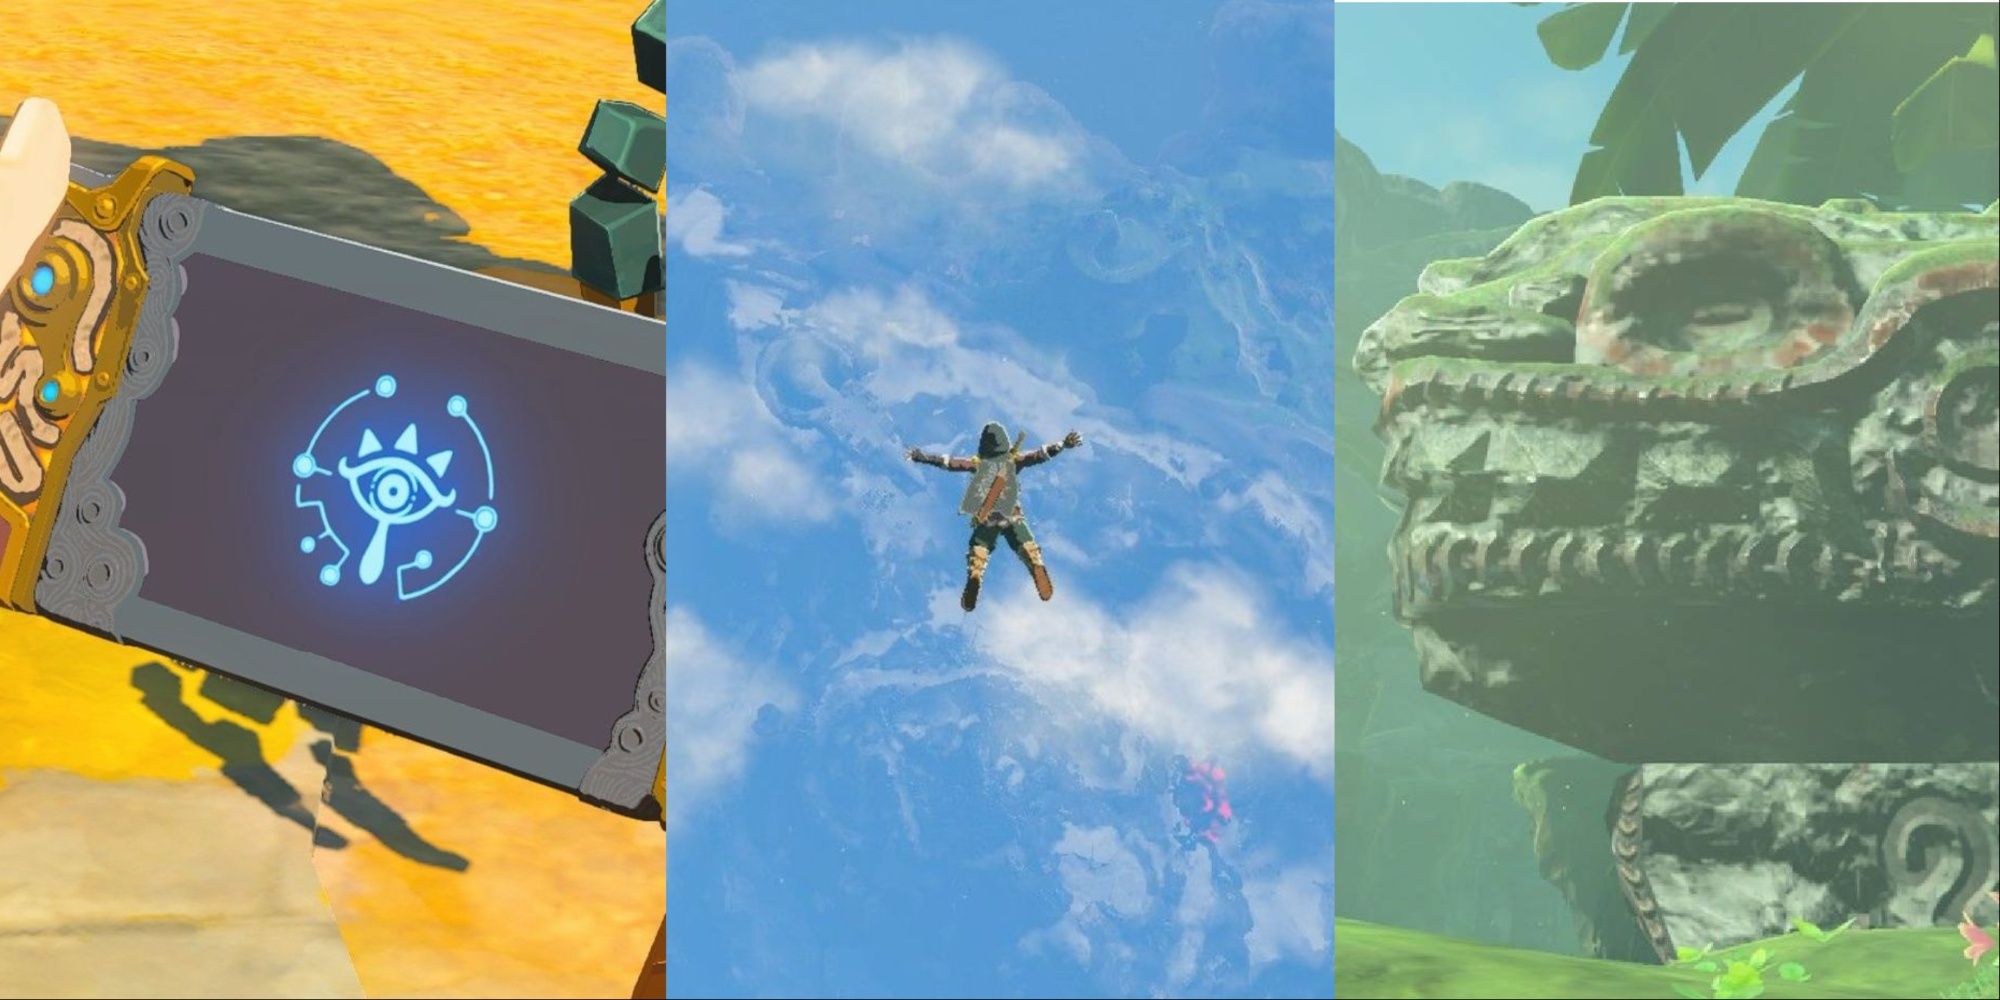 Zonai dragon head from Breath of the wild, Link jumping from a sky island, and the purah pad, split image